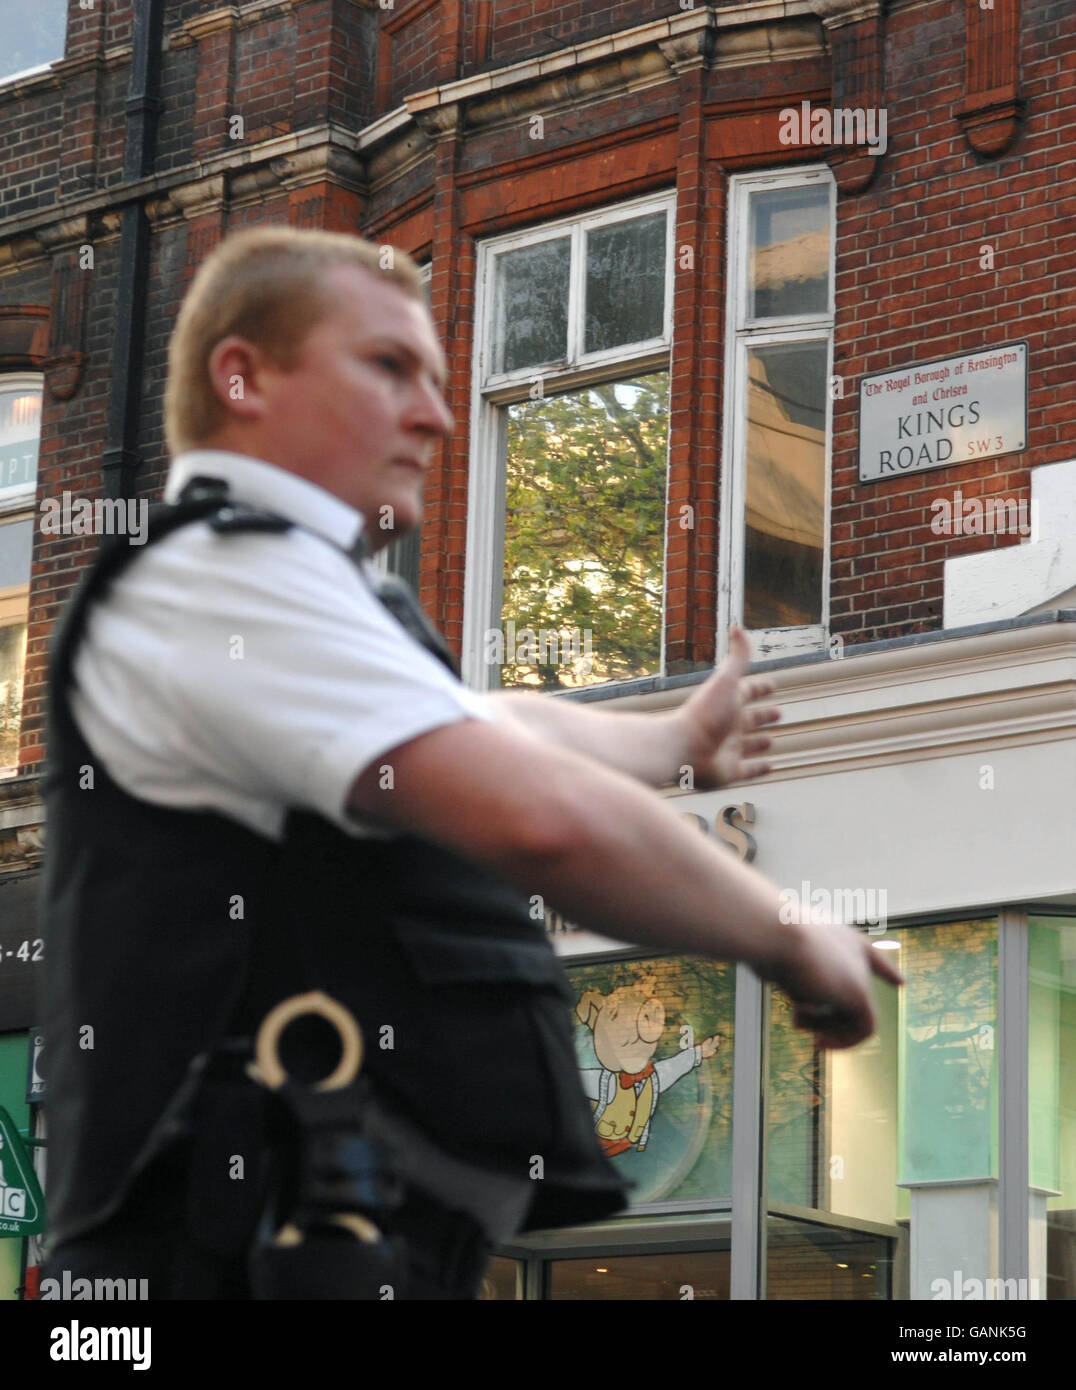 A police officer diverts traffic from the King's Road in central London, following an incident nearby, where armed police were shot at. Stock Photo